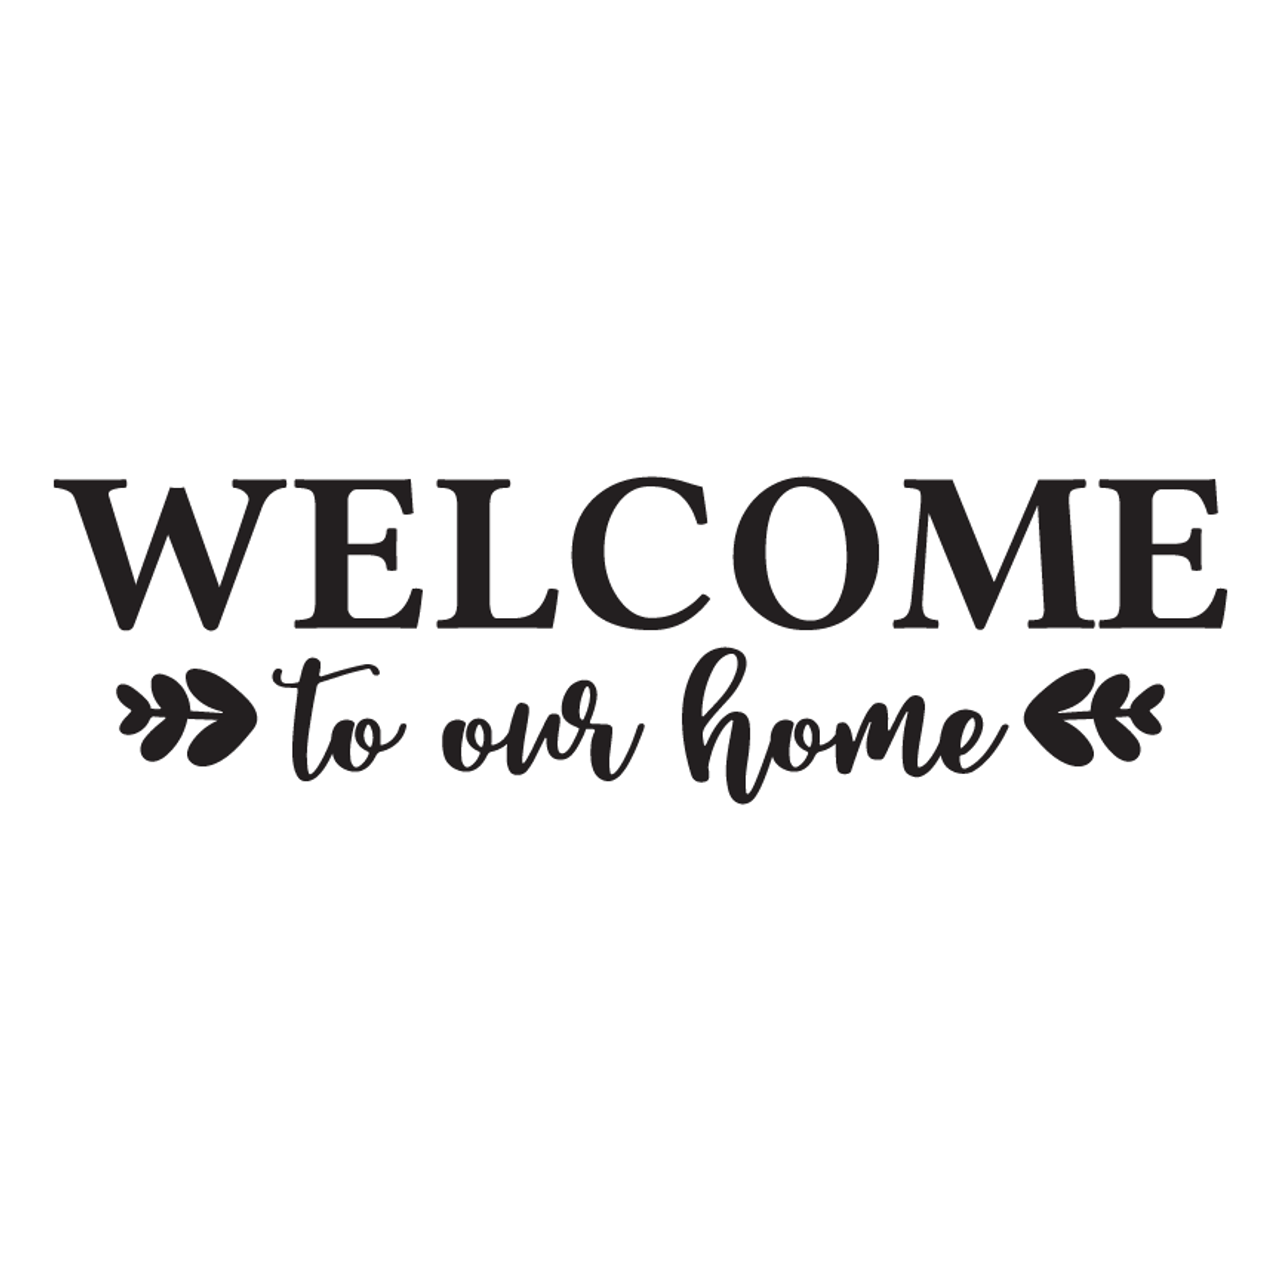 Download Welcome To Our Home SVG - SVG EPS PNG DXF Cut Files for ...